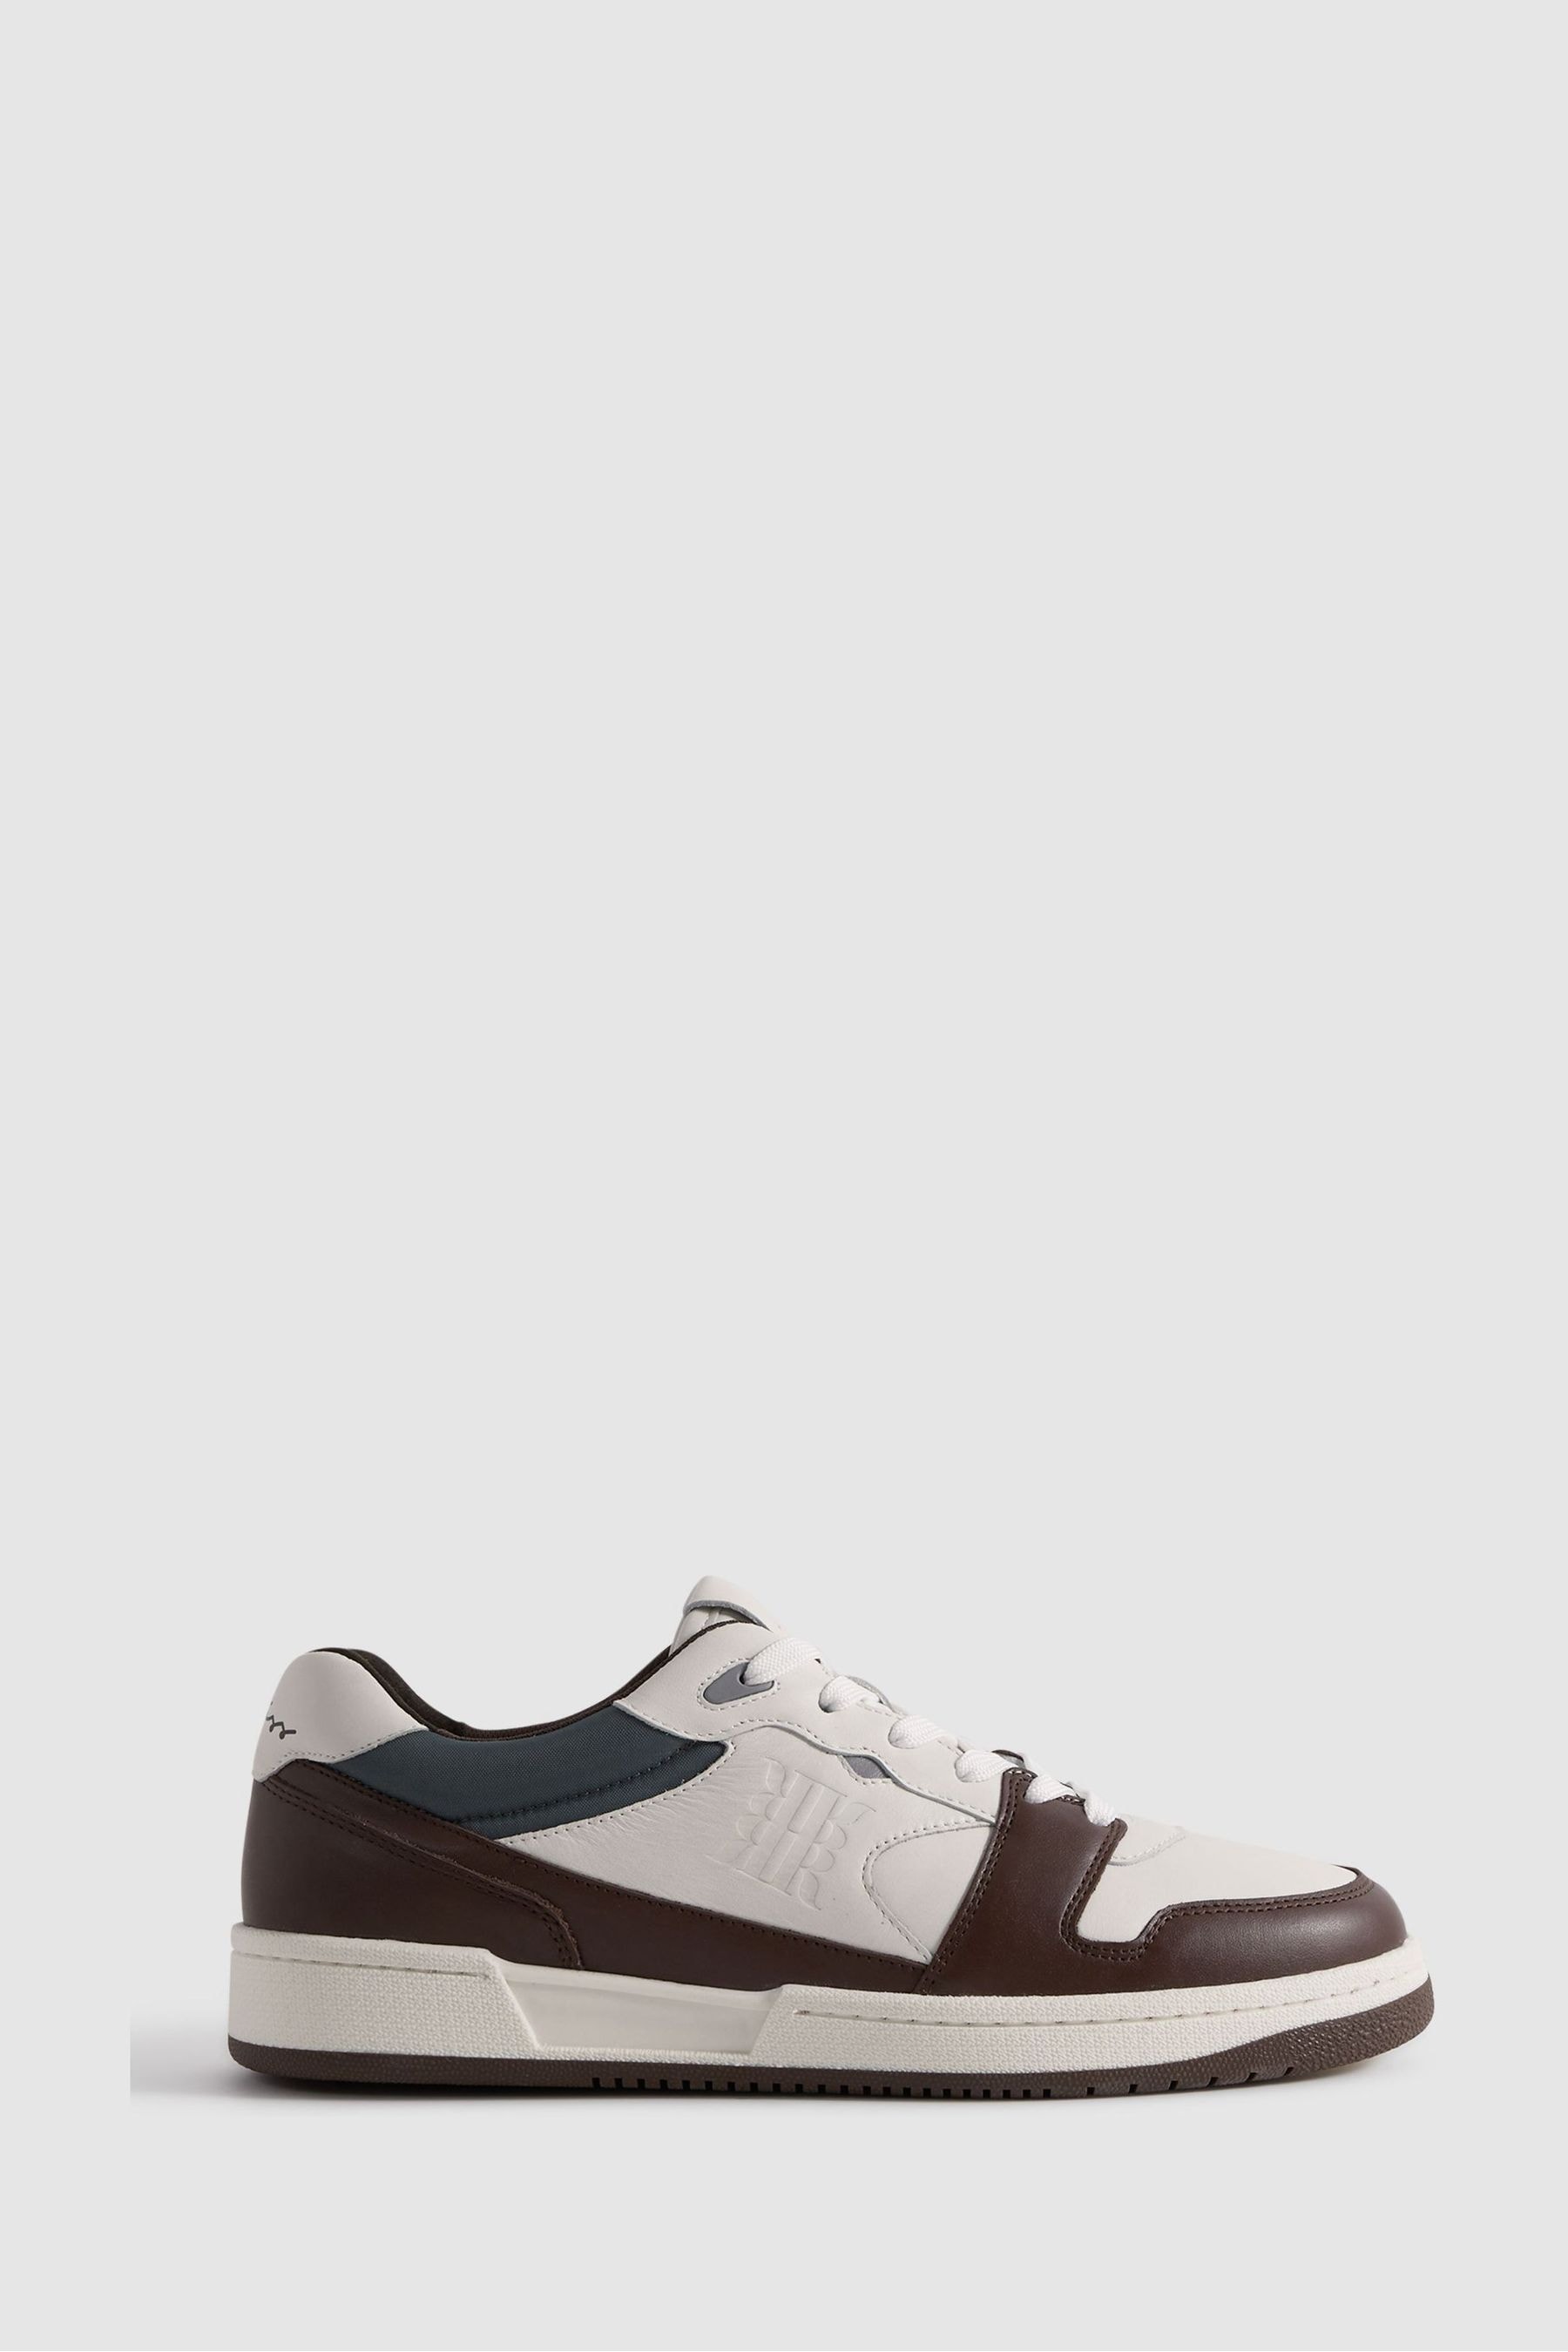 Reiss Astor - Brown Leather Lace-up Trainers, Us 10